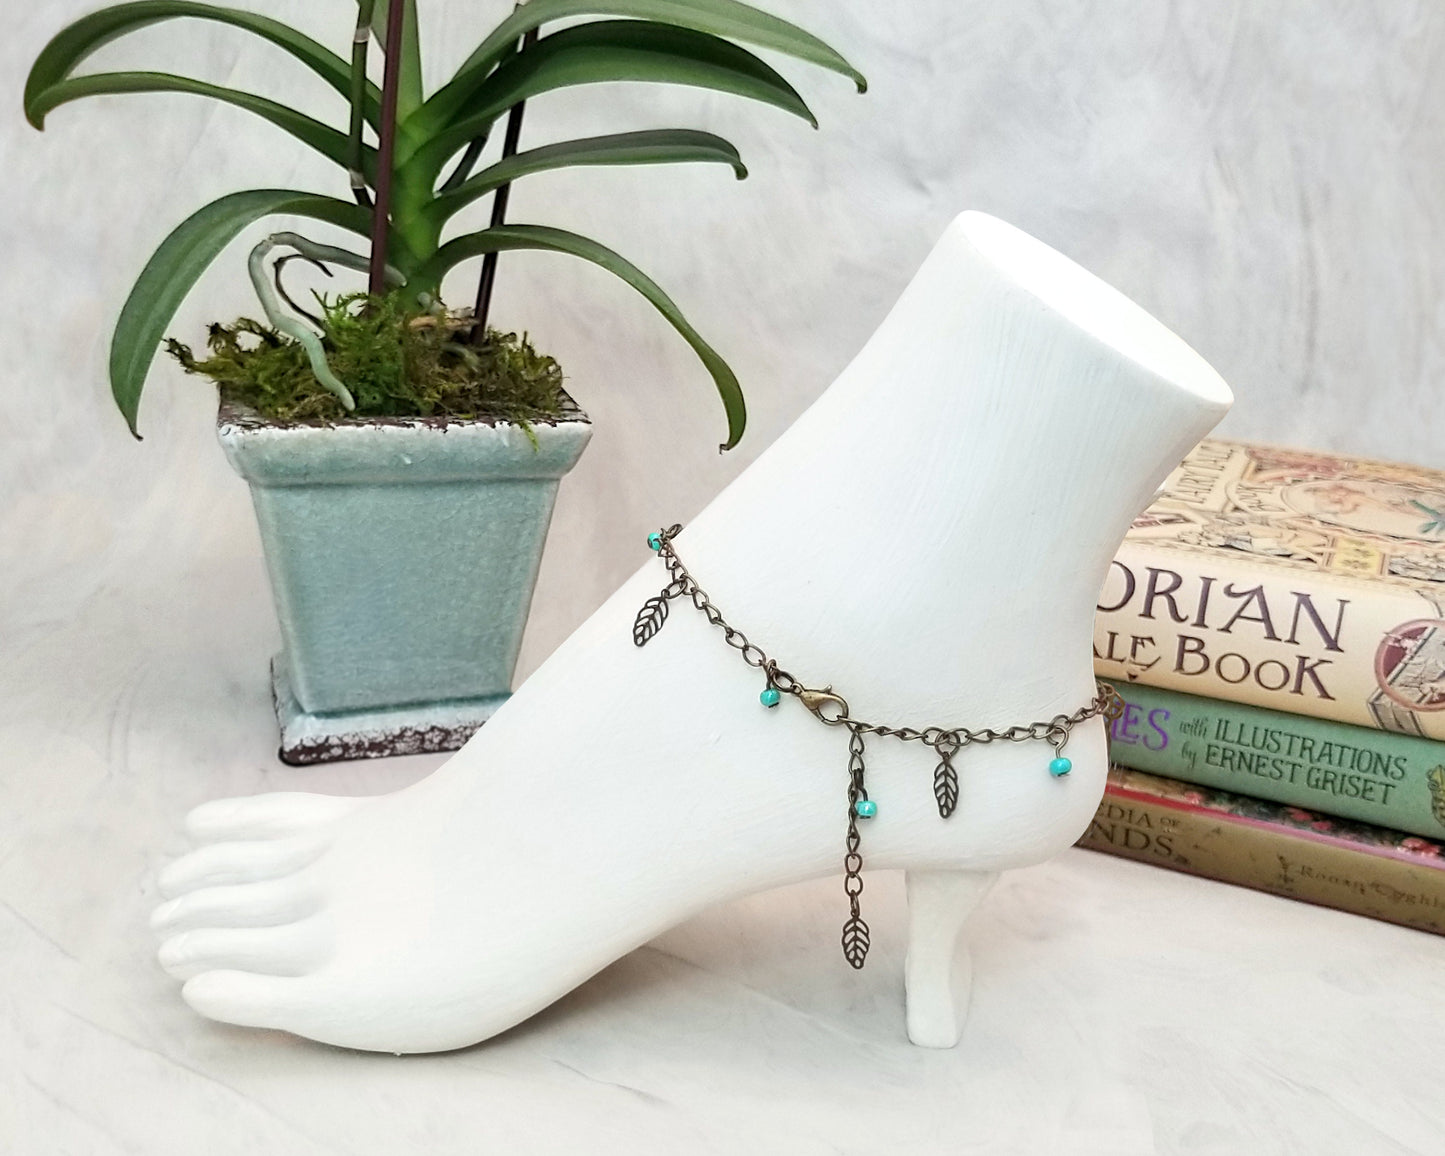 Chain Anklet or Bracelet in Turquoise Blue, Adjustable, Beach, Boho, Bohemian, Gypsy, Steampunk, Choice of Colors and Metals